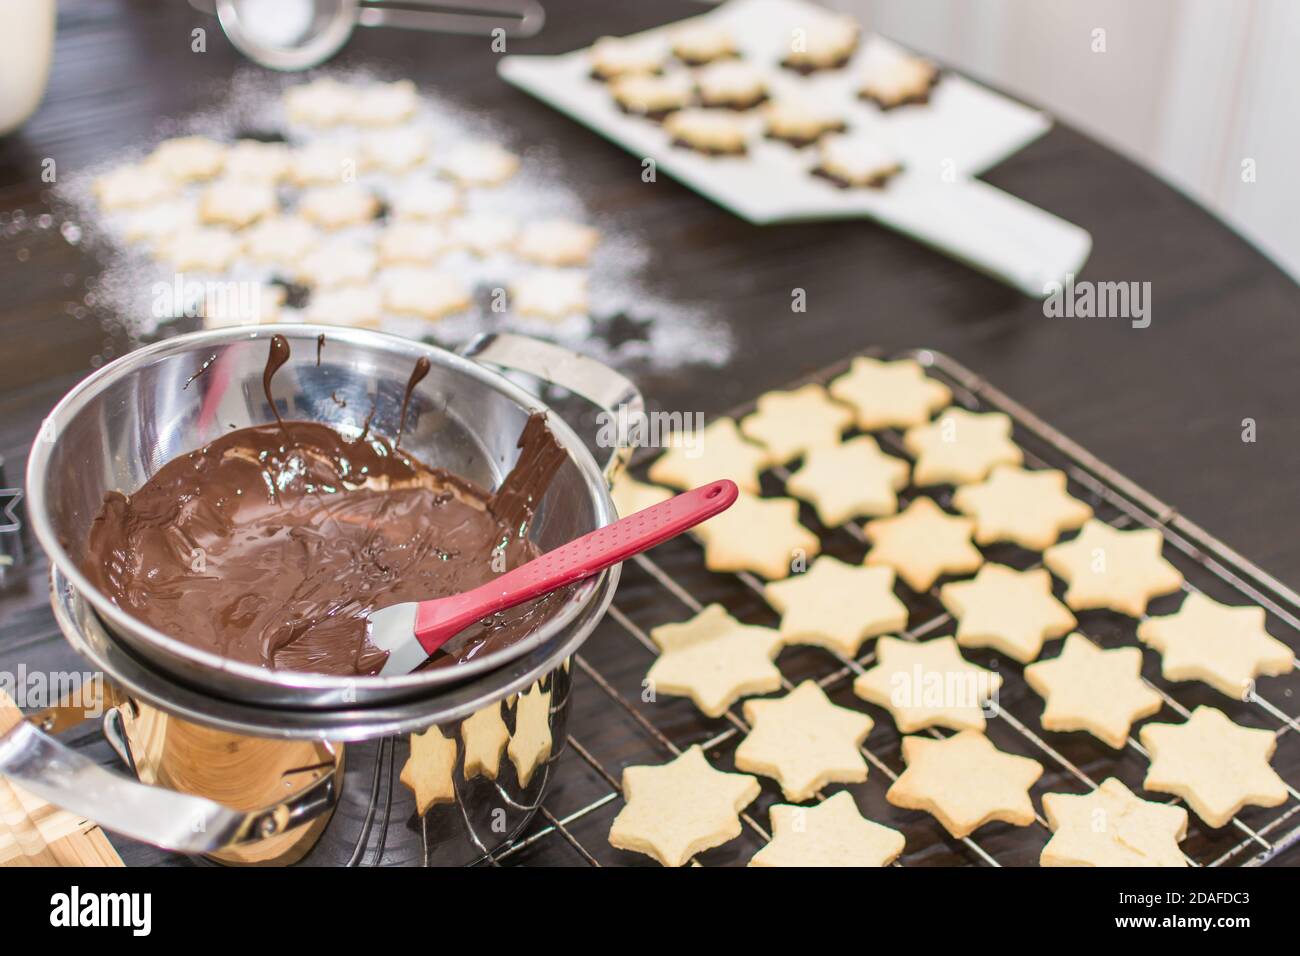 In the time before Christmas, cookies are baked at home in a star shape. Shortcrust pastry stars are covered with chocolate and sprinkled with powdere Stock Photo